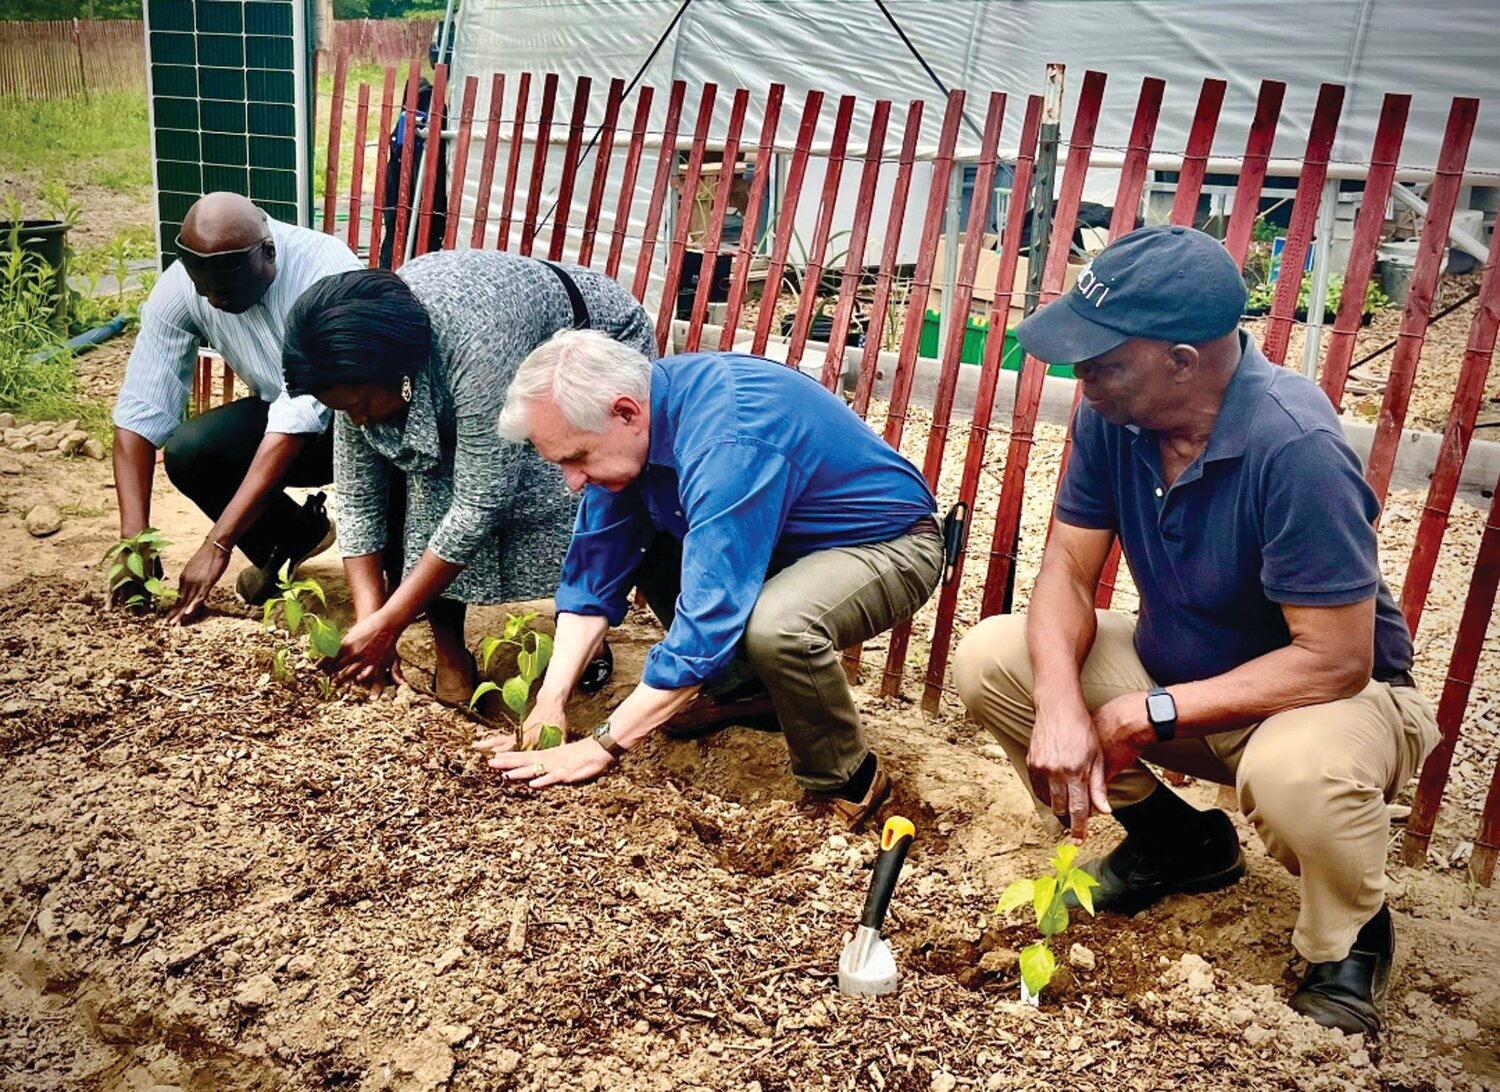 BAMI VISIT: On May 19, U.S. Sen. Jack Reed visited Johnston’s Bami Farm, where 15 farmers grow food to feed families and produce specialty crops to be sold at local farmers markets.